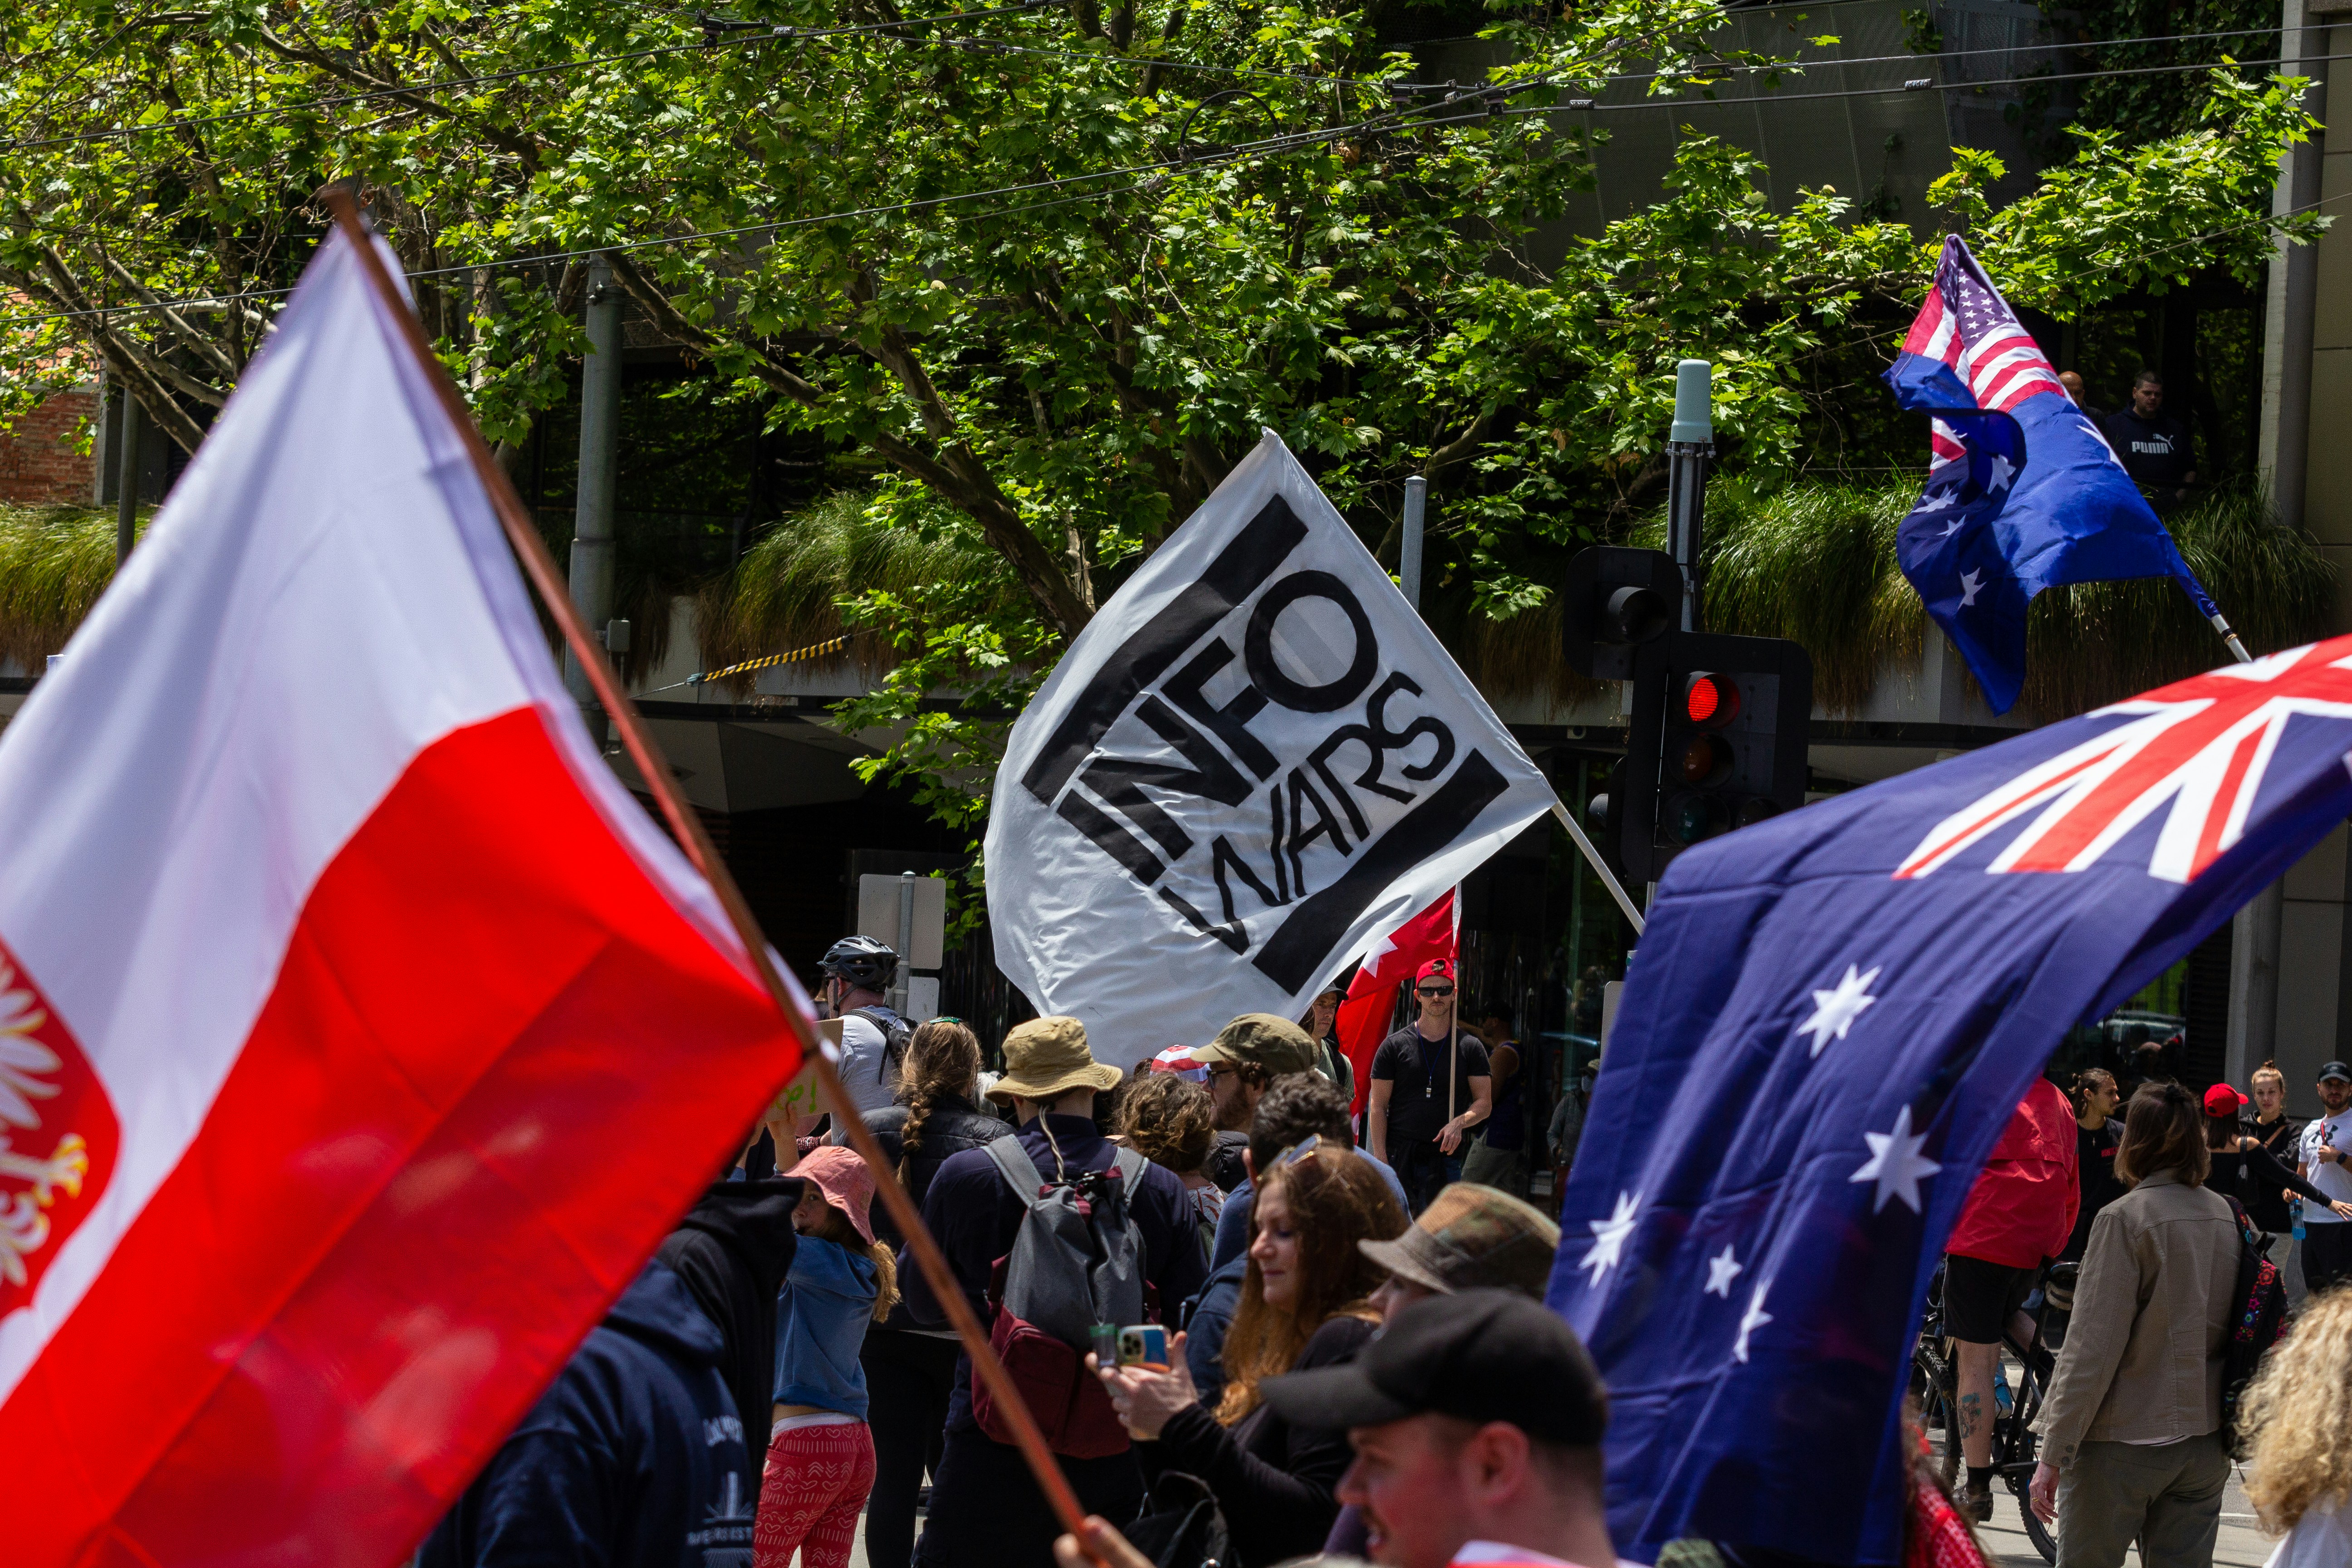 an info wars flag at A sign at Melbourne's Freedom protests rally and march in the city November 20th 2021 - over 200,000 people marched from Parliament to the Flagstaff Gardens. A happy family friendly crowd singing and chanting \